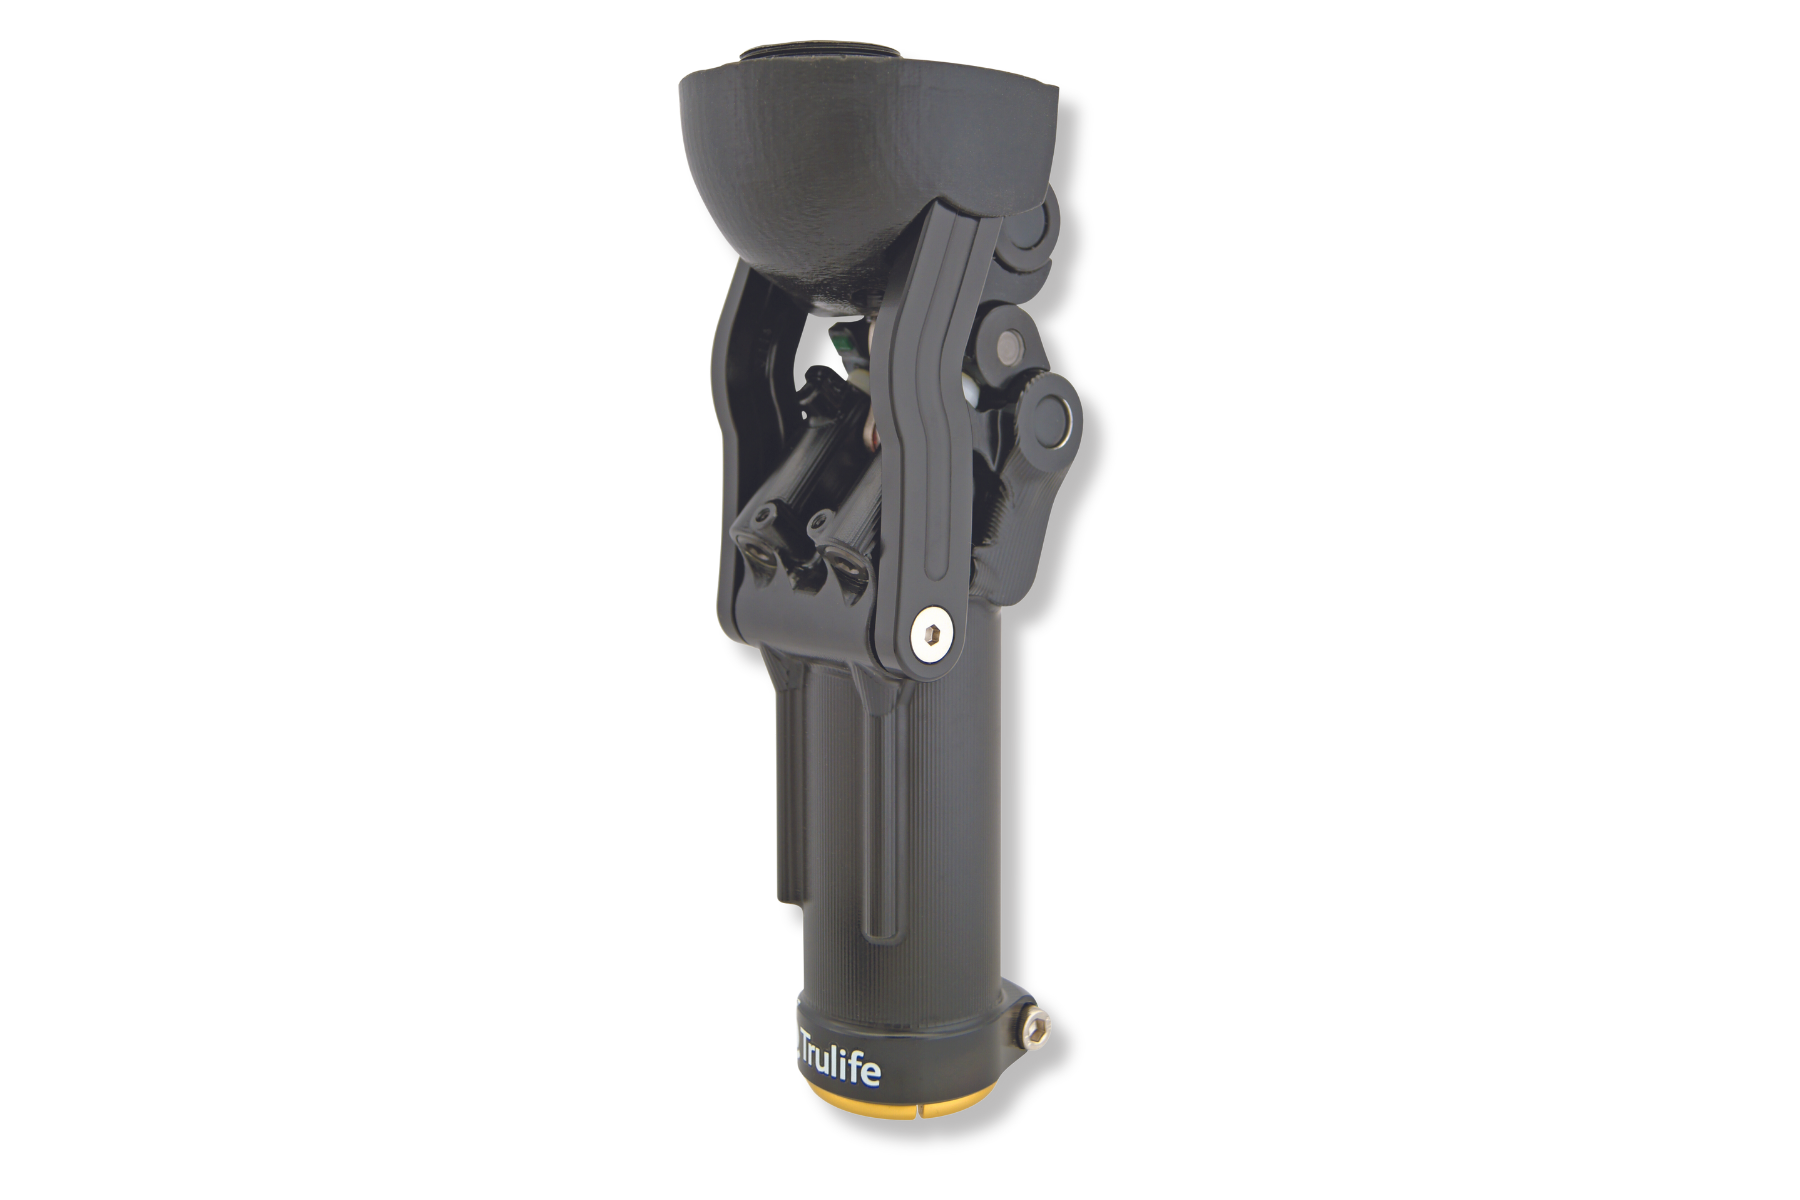 SSK615THR - Select Stance Flexion Knee with Threaded Proximal Adapter K3-K4